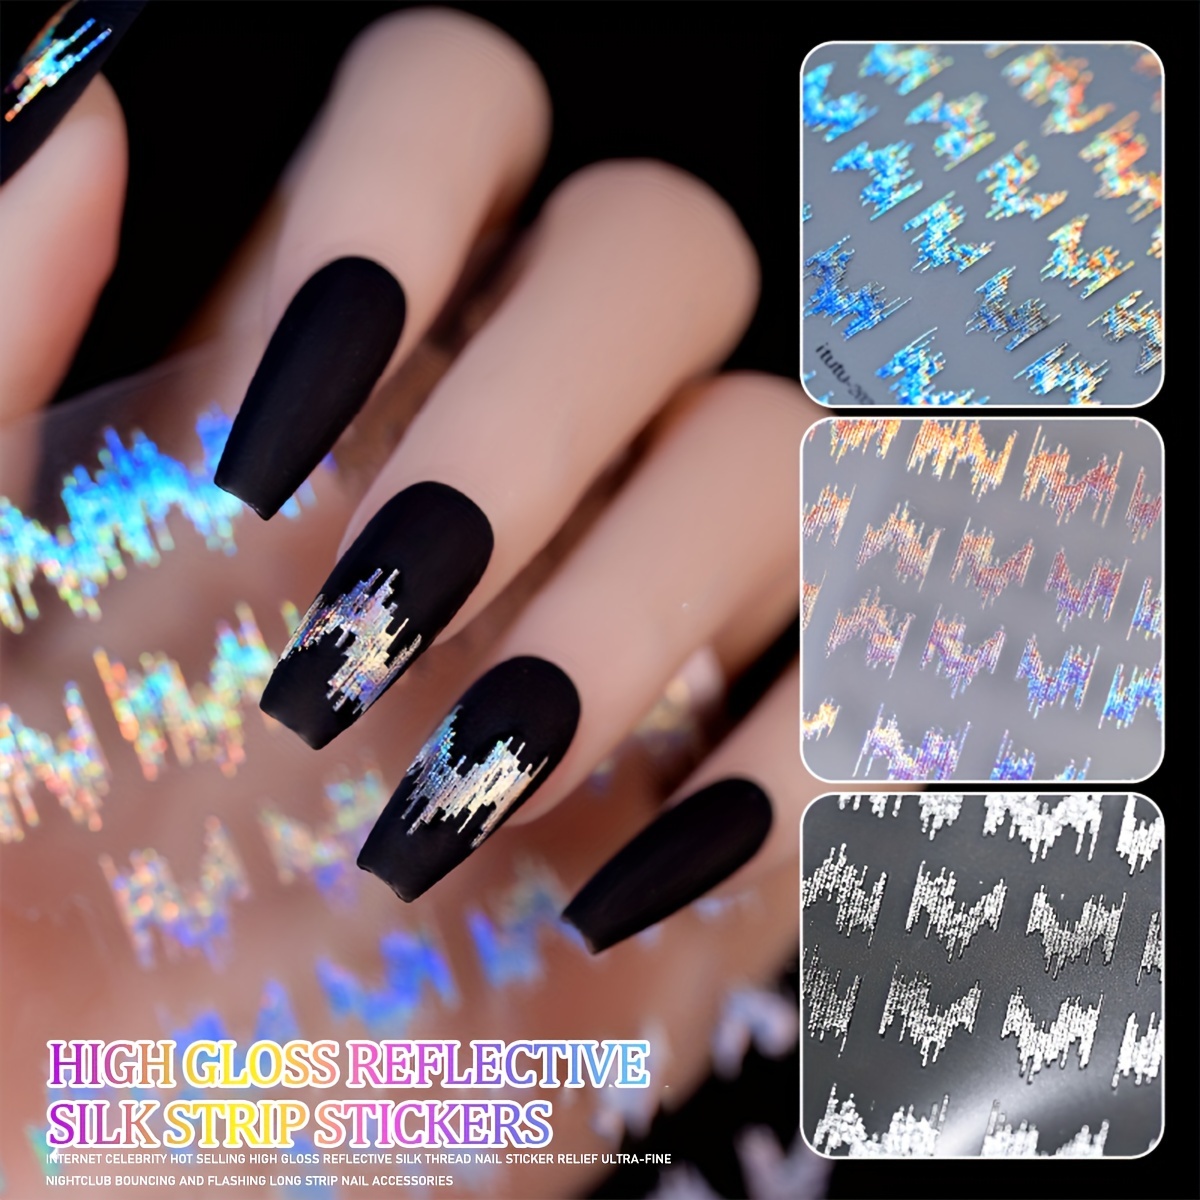 

Ultra-shiny Reflective Nail Art Stickers - Aurora Glitter, Self-adhesive Decals For Diy Manicure, Formaldehyde-free